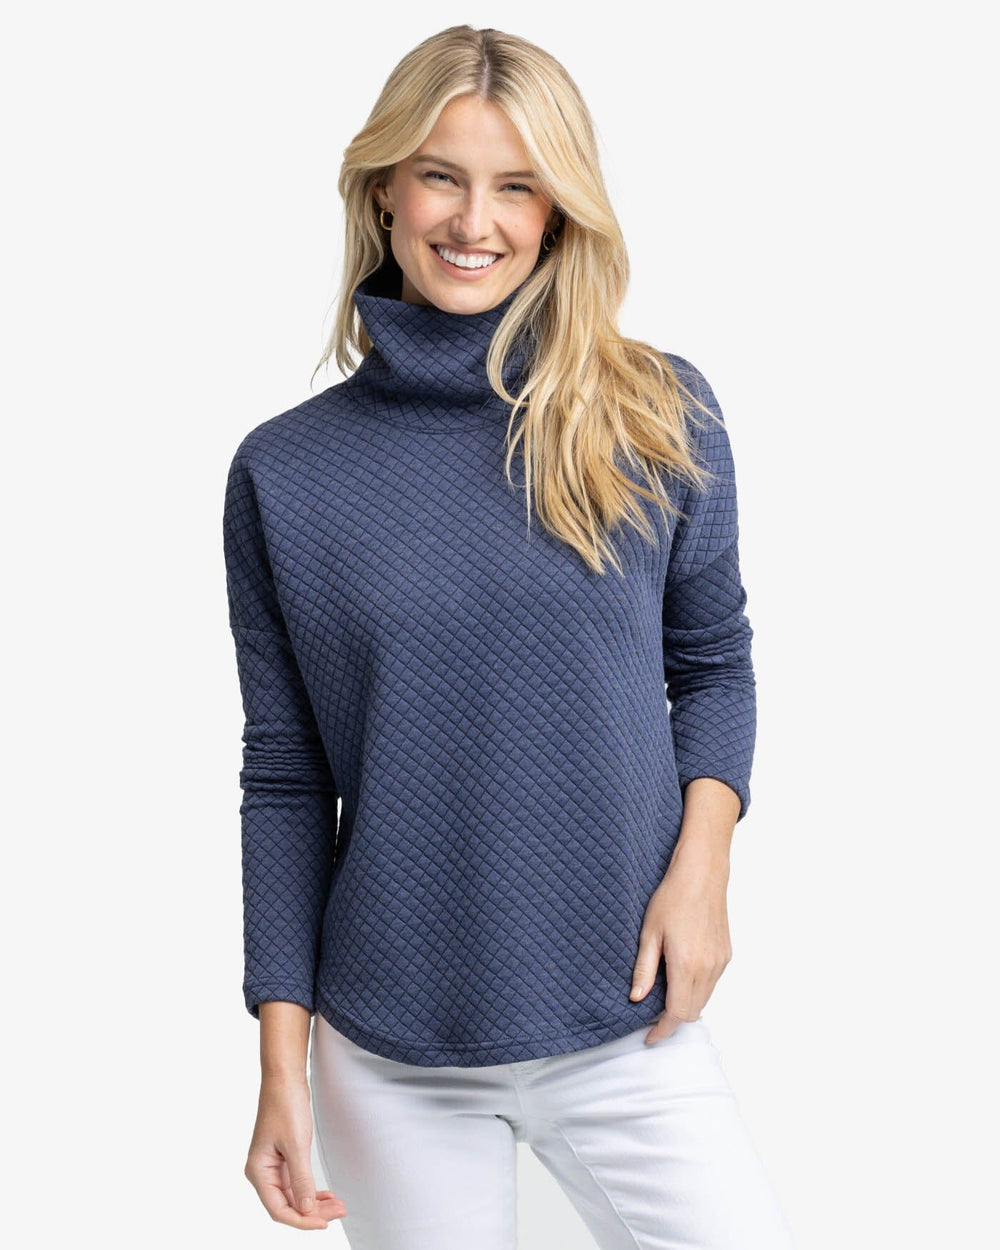 The second front view of the Southern Tide Mellie MockNeck Sweatshirt by Southern Tide - Nautical Navy